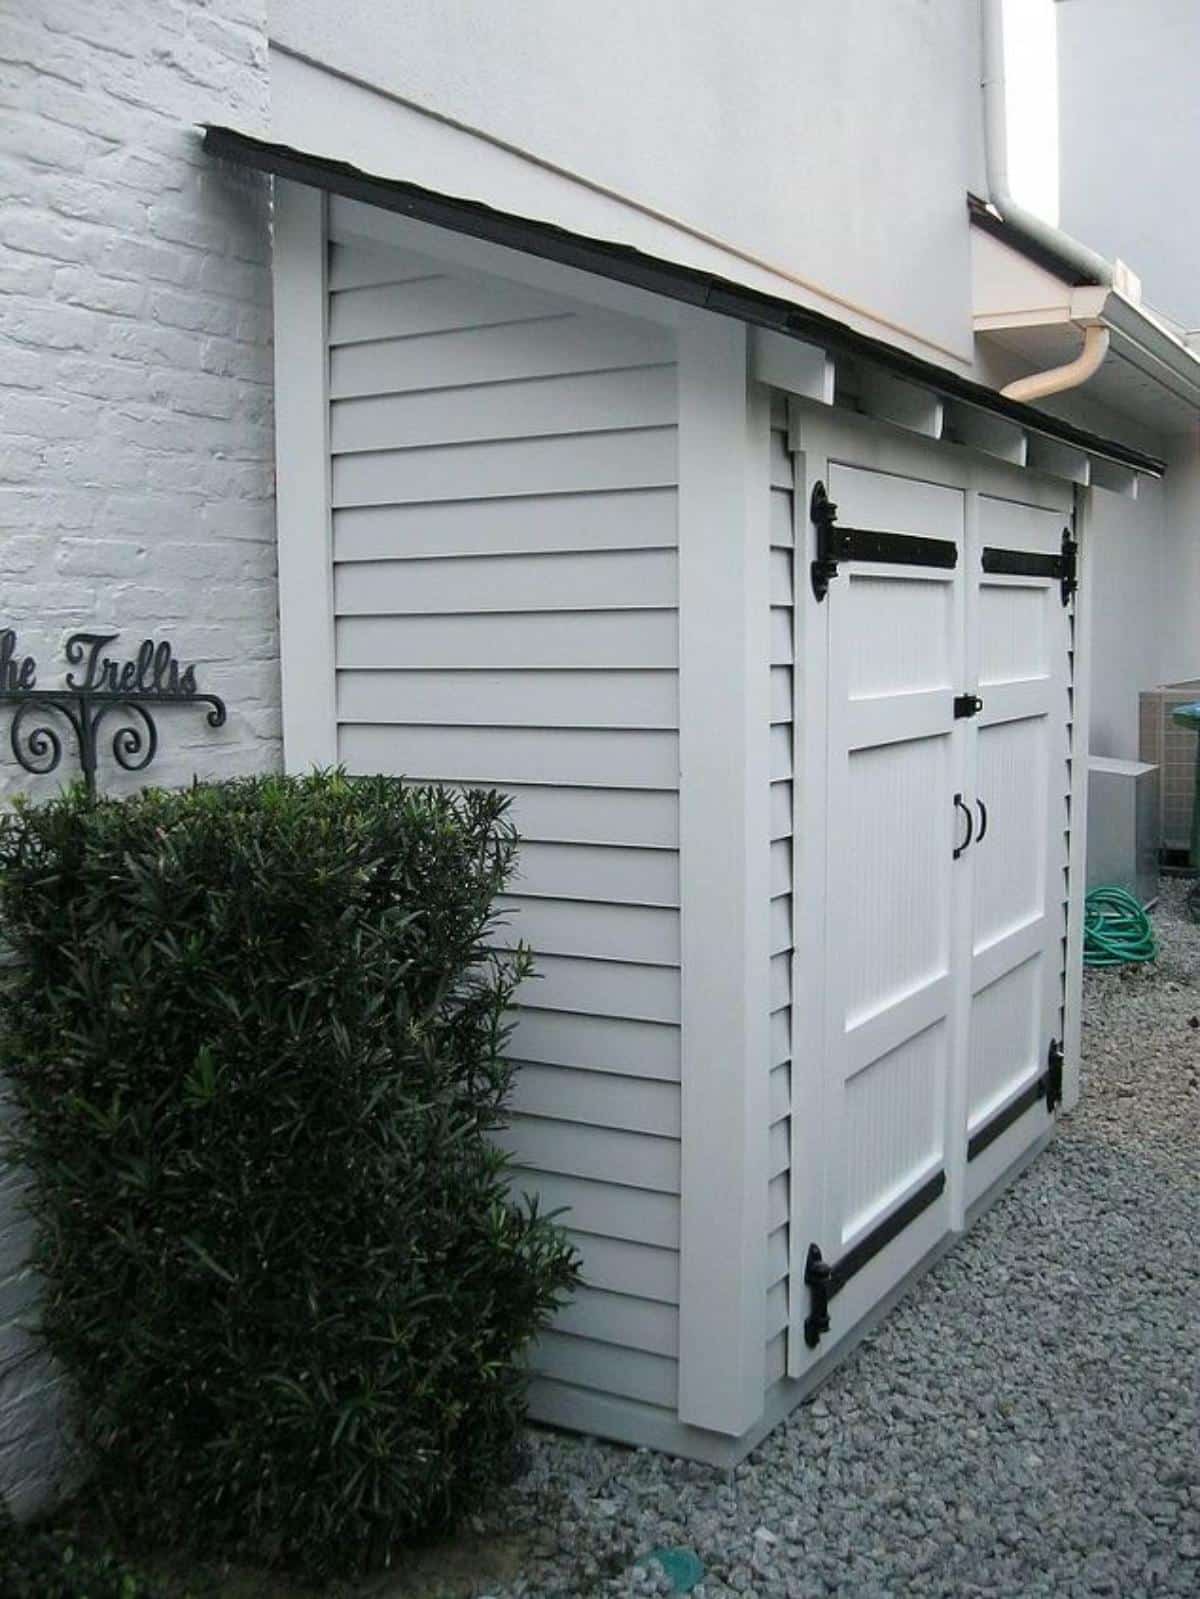 Small Shed Storage Along the Side of the House